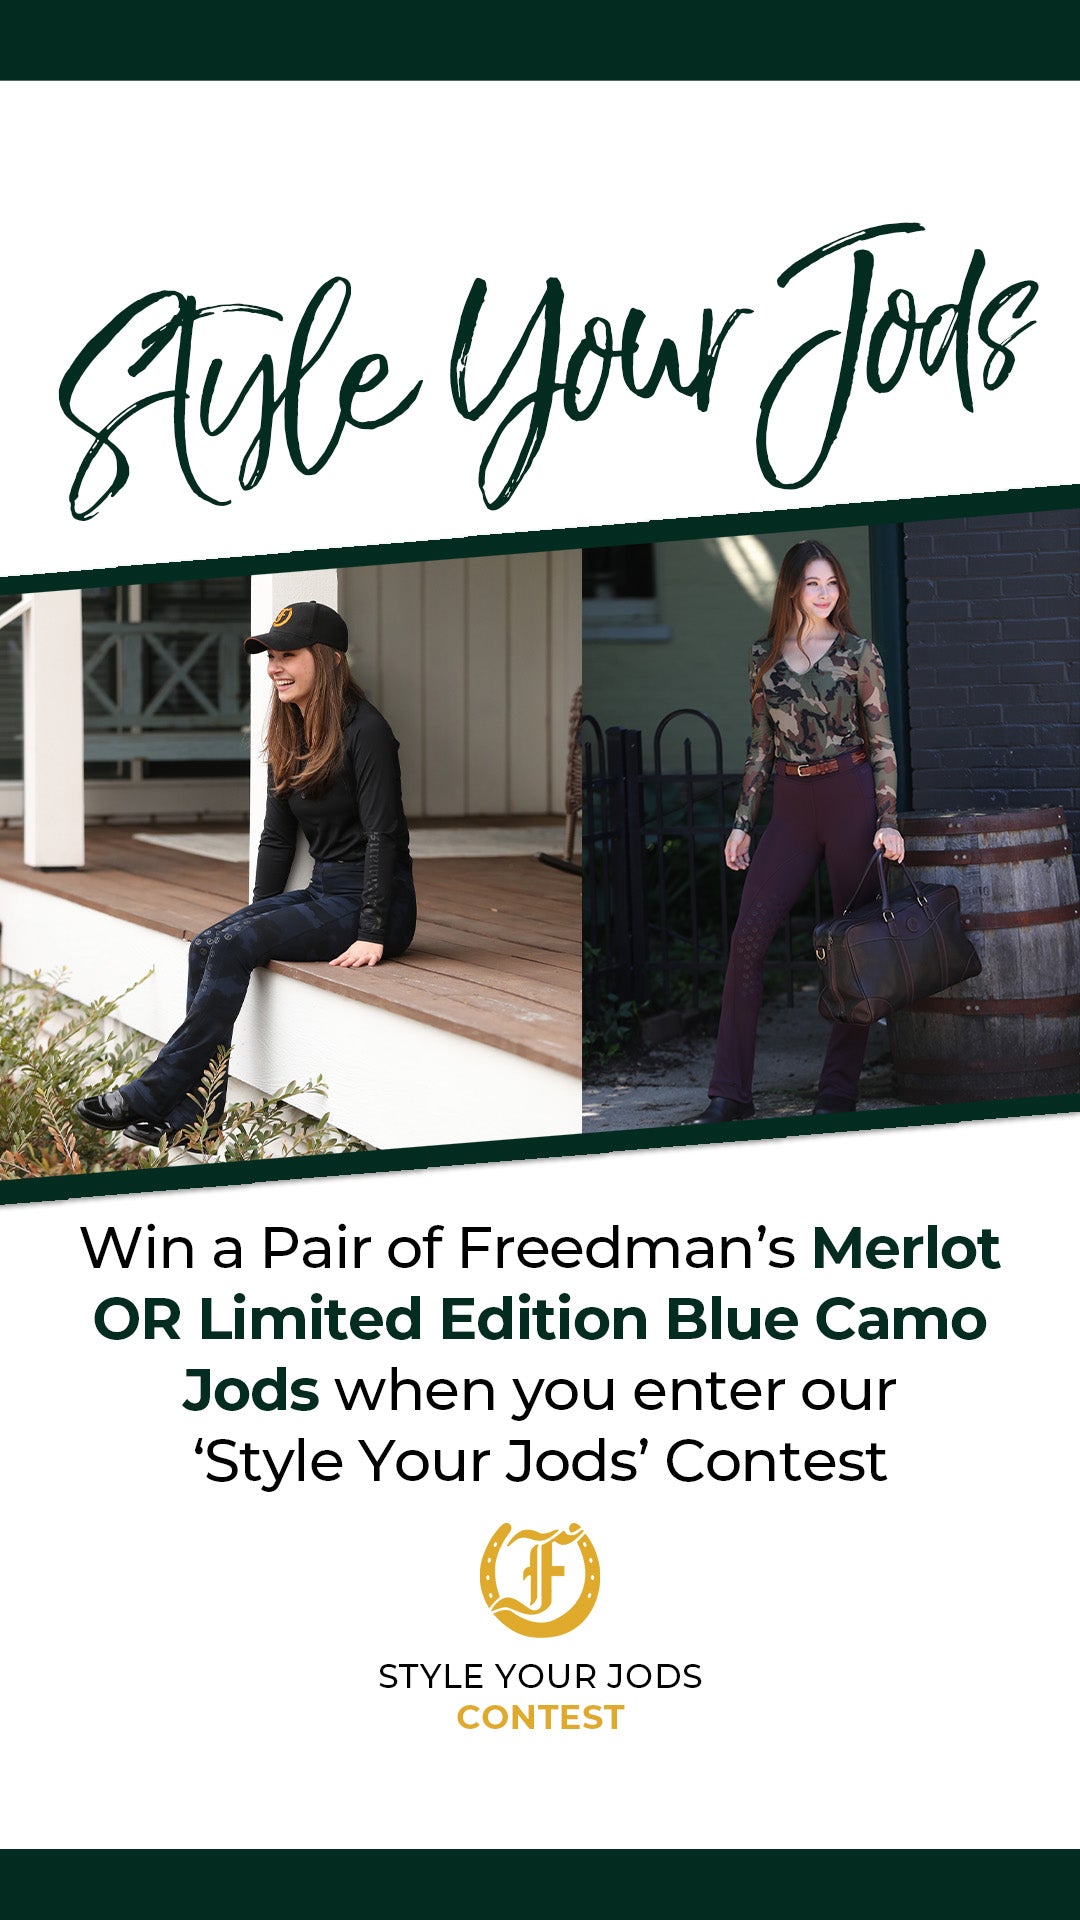 NOW CLOSED FOR ENTRIES! March 2023: 'Style Your Jods' Contest - Win a Pair of Merlot or Limited Edition Blue Camo Jods! All the details below!